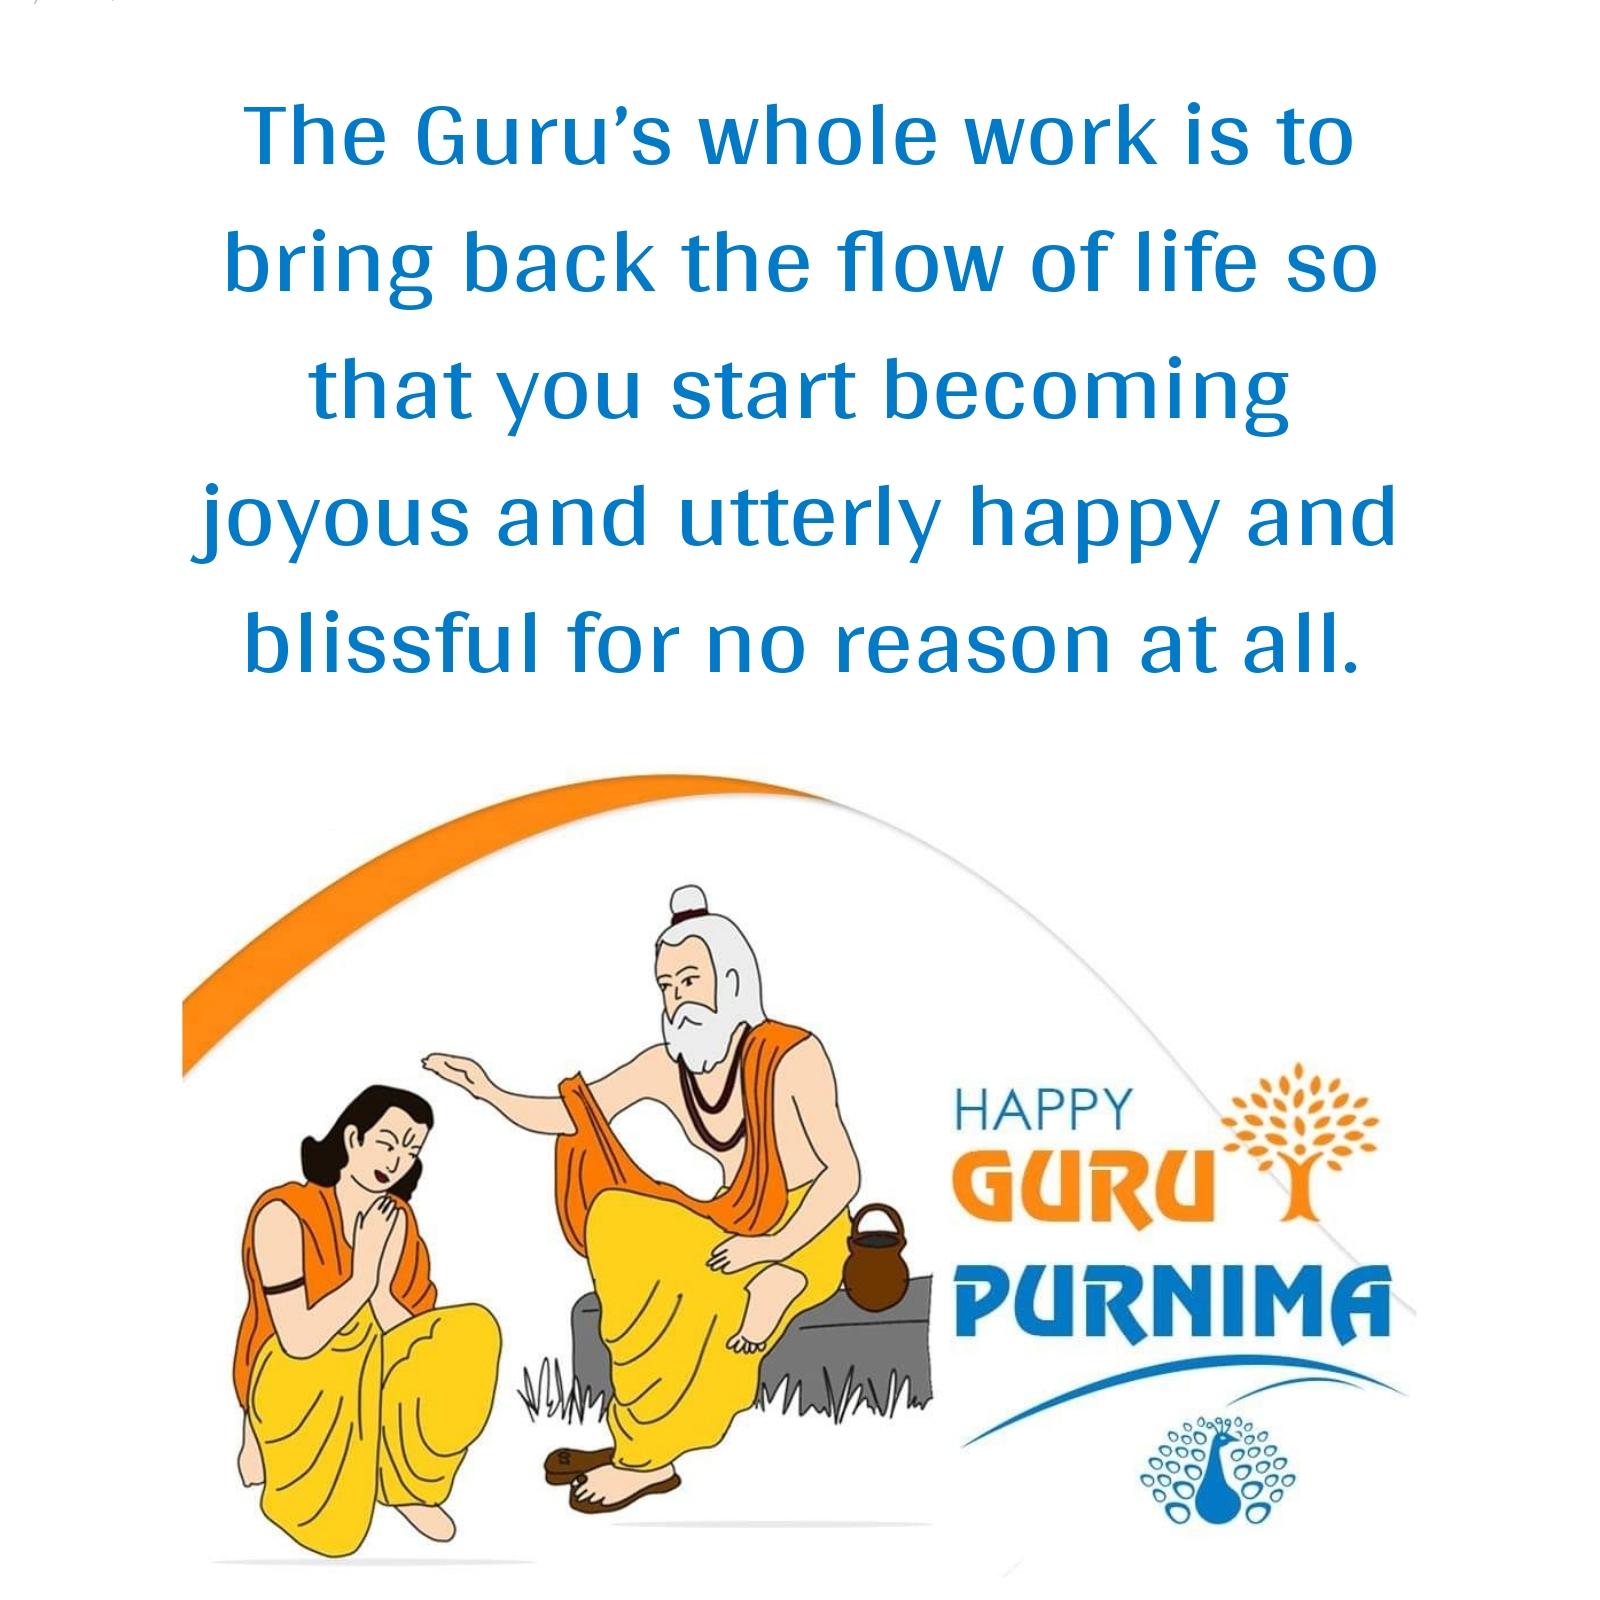 The Gurus whole work is to bring back the flow of life